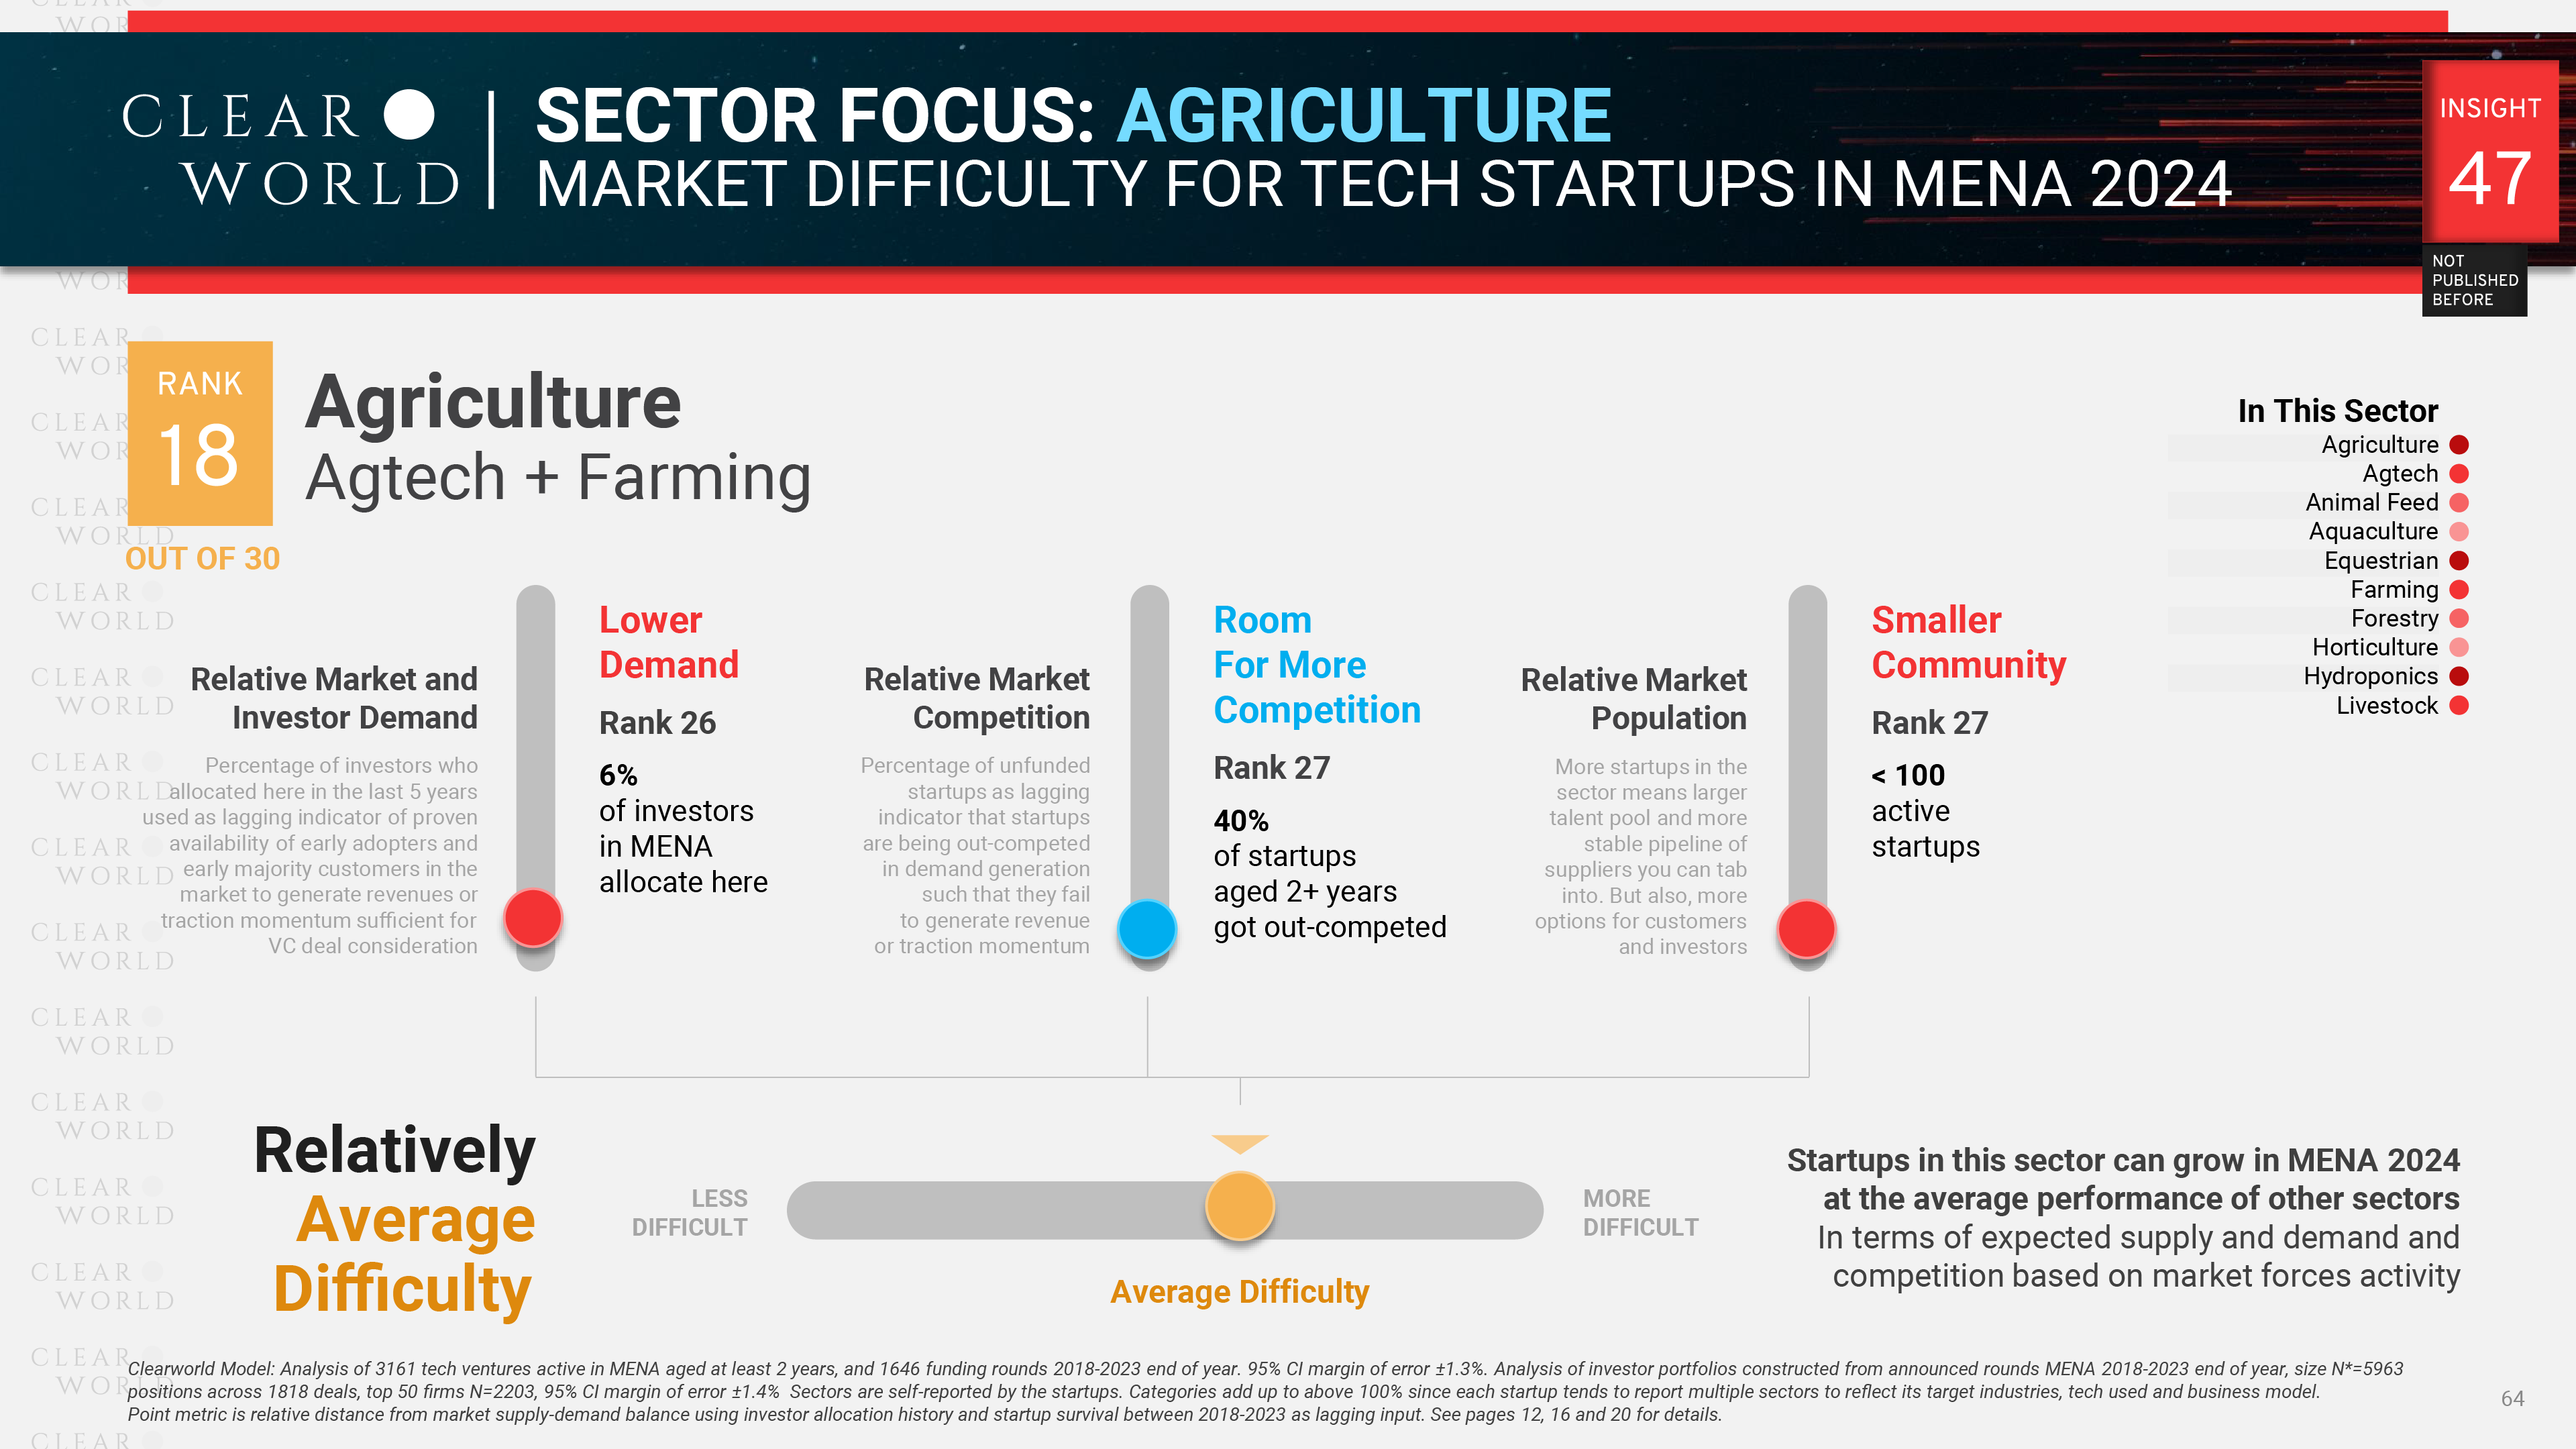 How Difficult Agtech Sector Is For MENA Startups 2024 - Clearworld